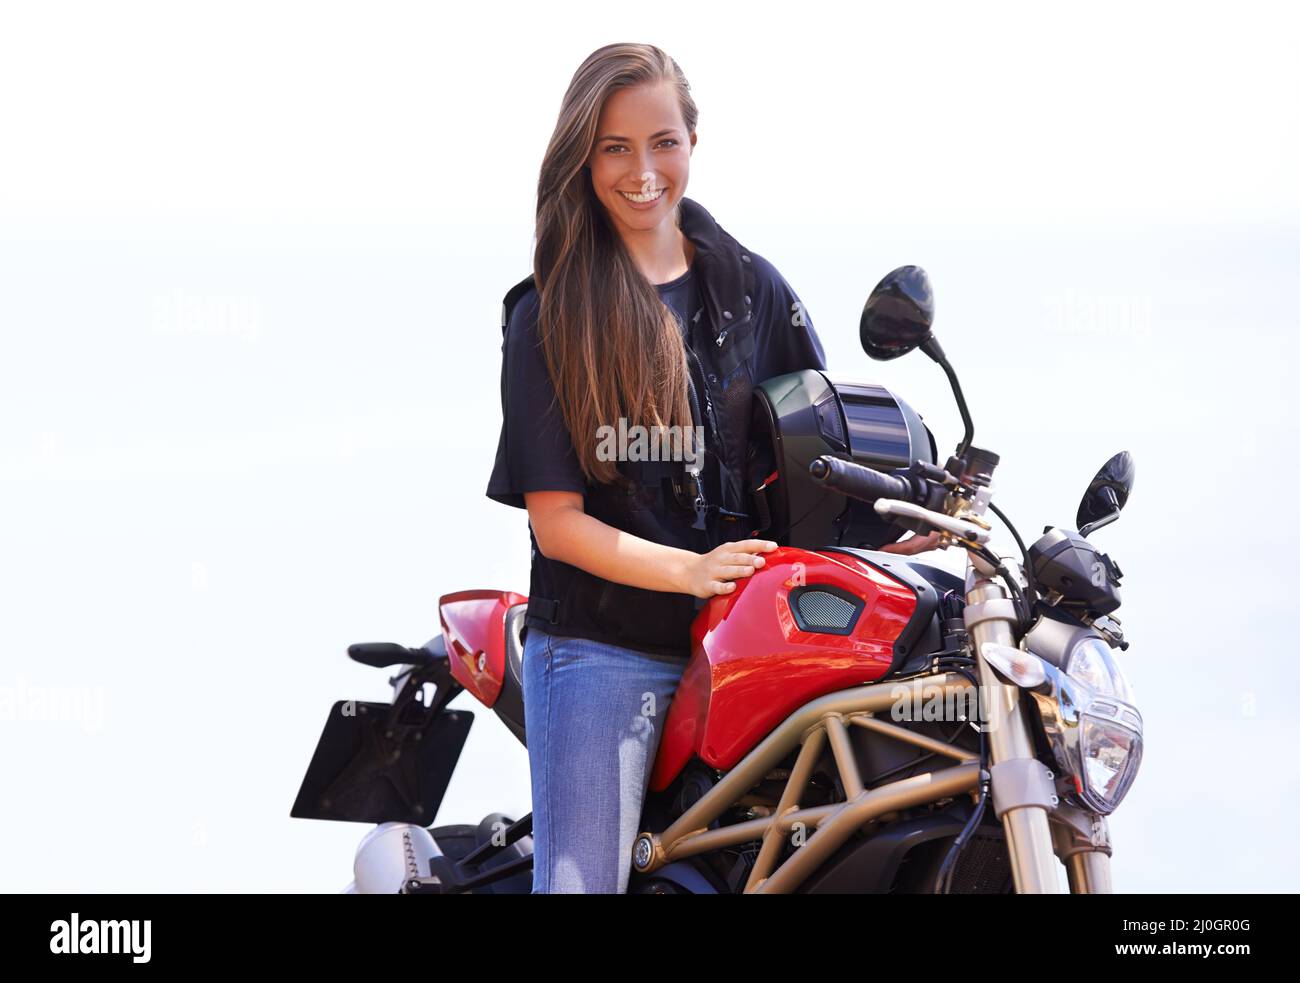 Shes a true biker chick. A beautiful young woman sitting on her red motorcycle. Stock Photo